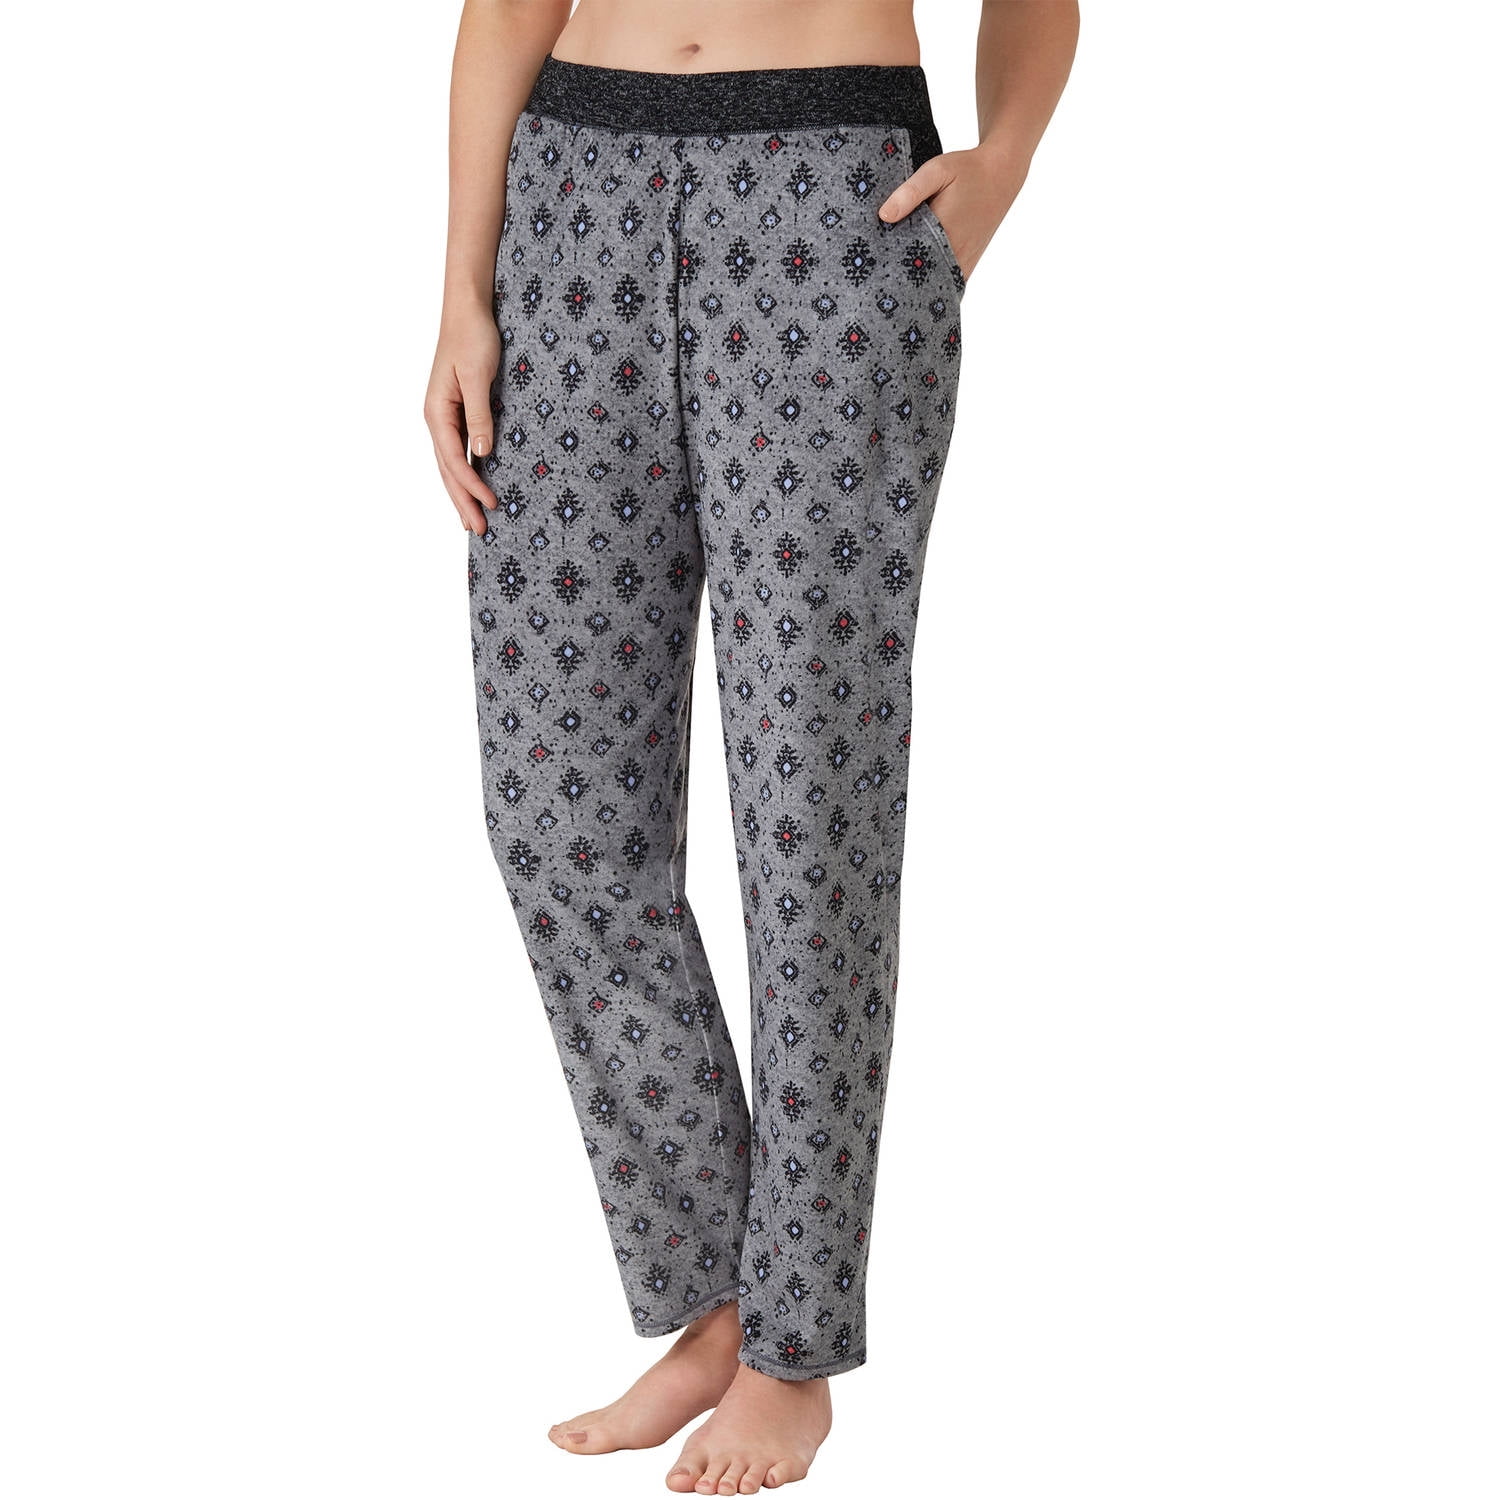 ClimateRight by Cuddl Duds - Women's and Women's Plus Velour Sleep Pant ...